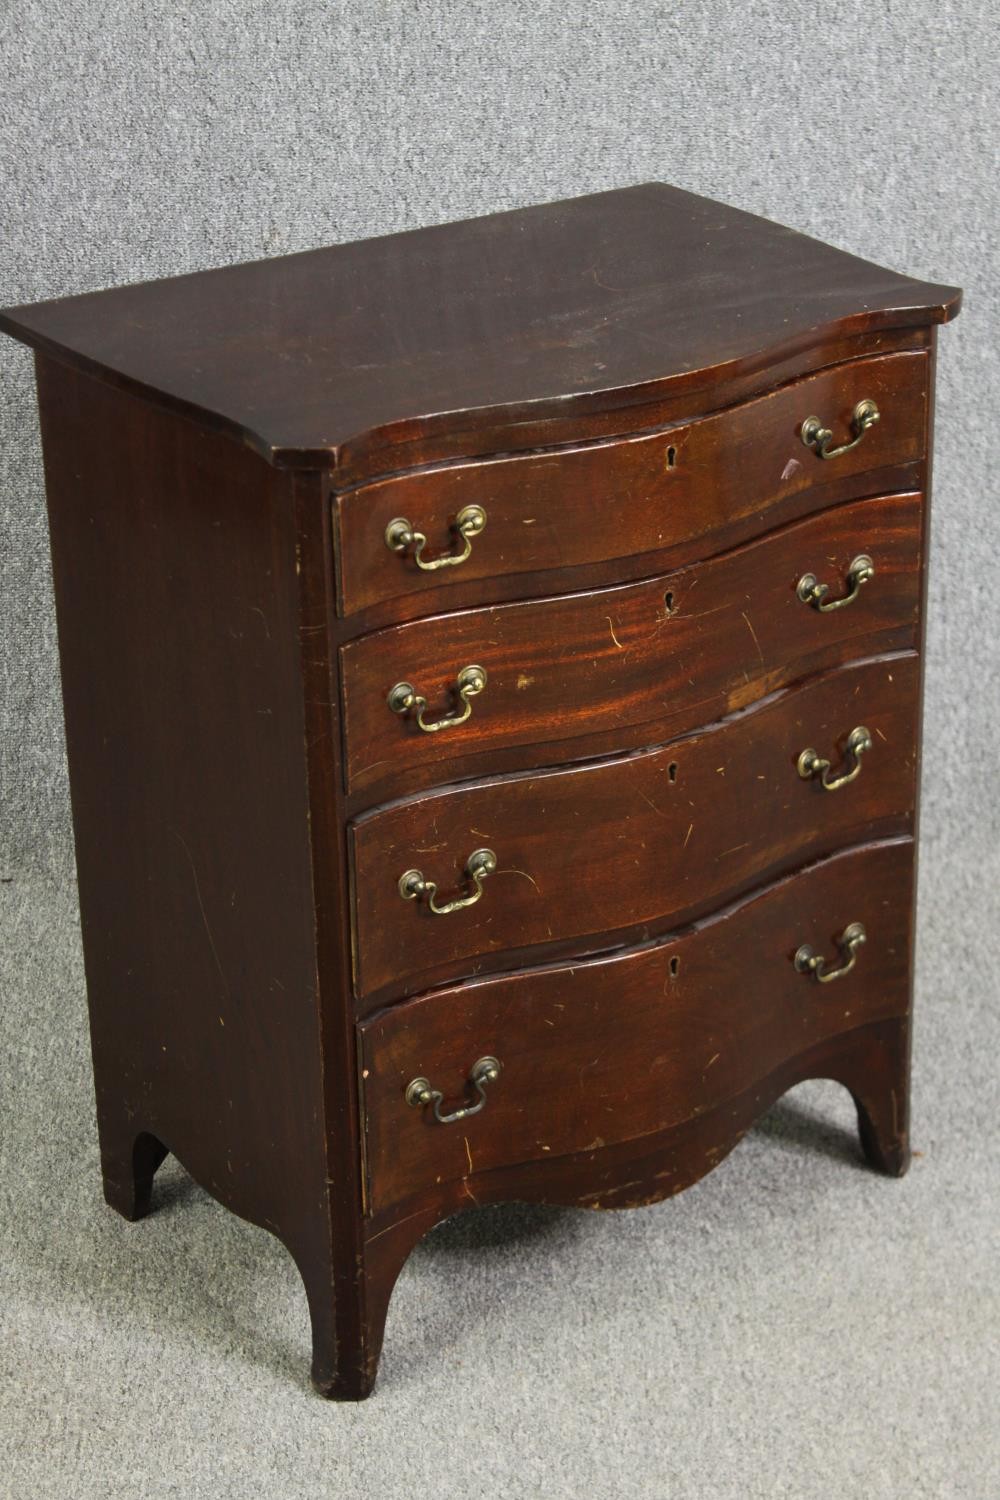 A small George III style mahogany chest of drawers, early 20th century. H.74 W.59 D.41cm. - Image 2 of 5